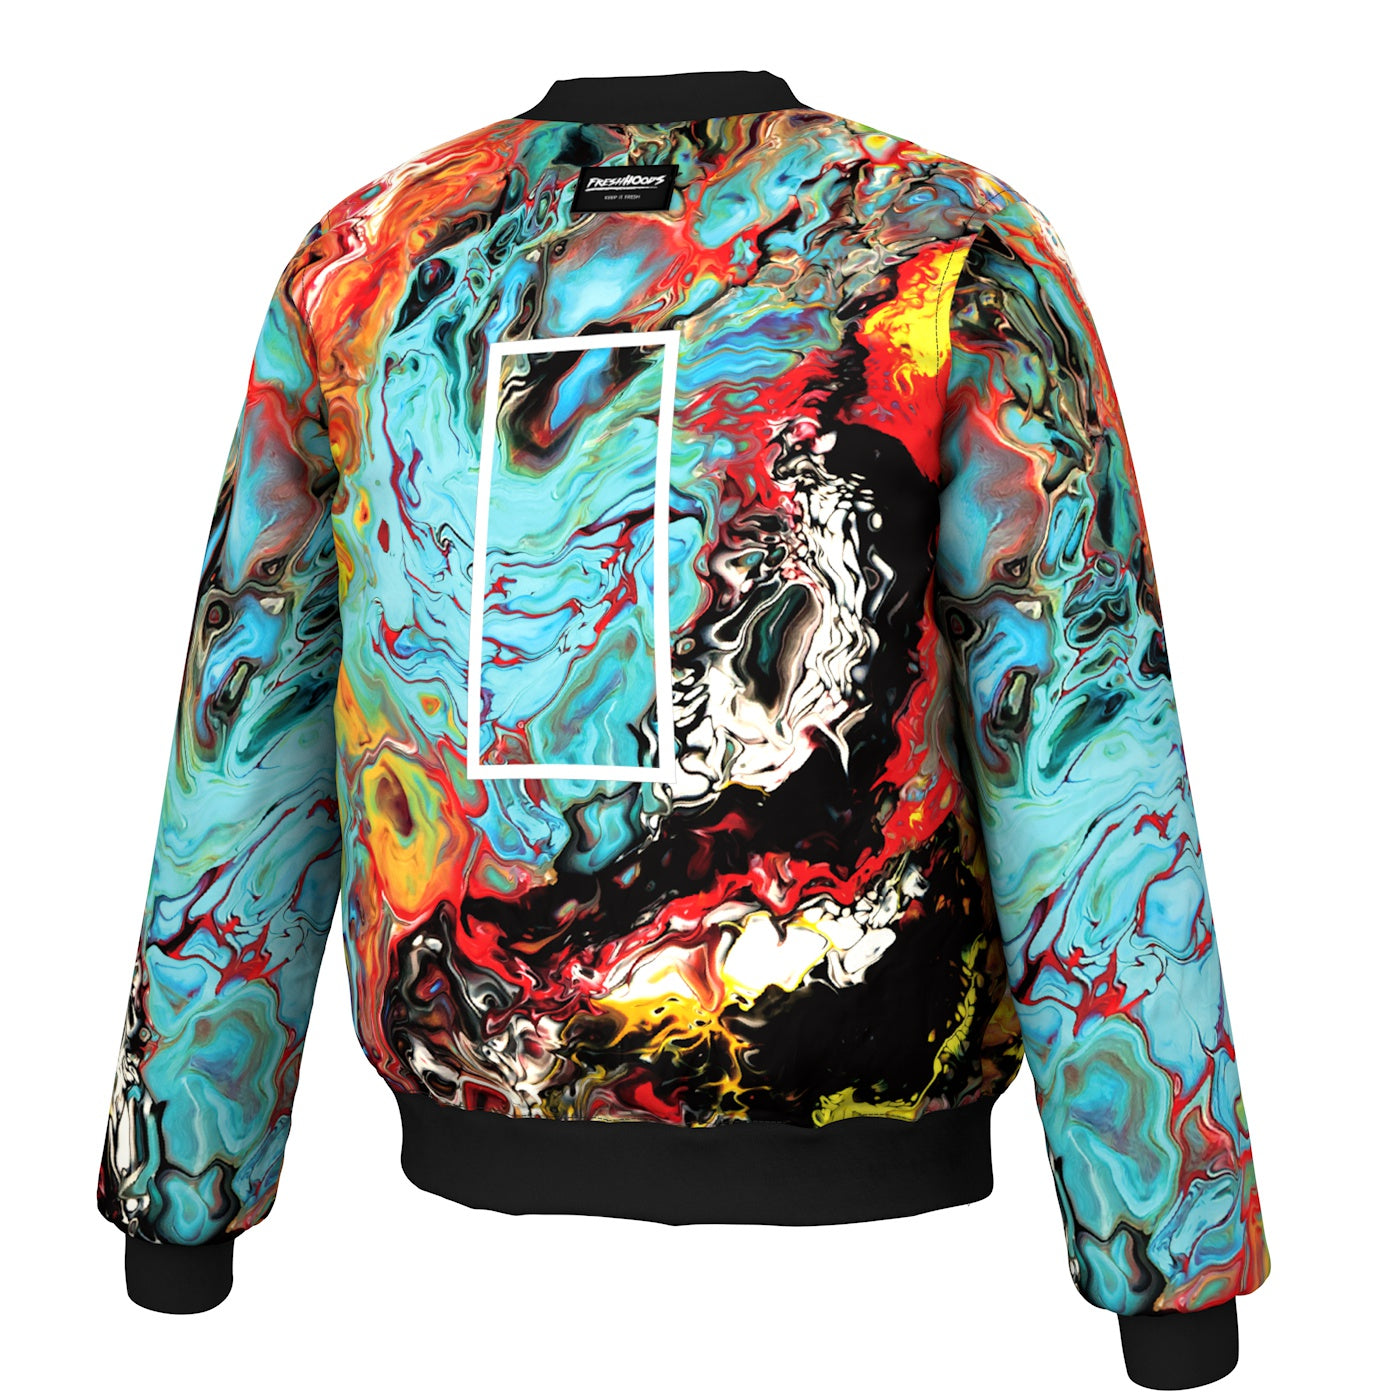 Oil Painting Bomber Jacket